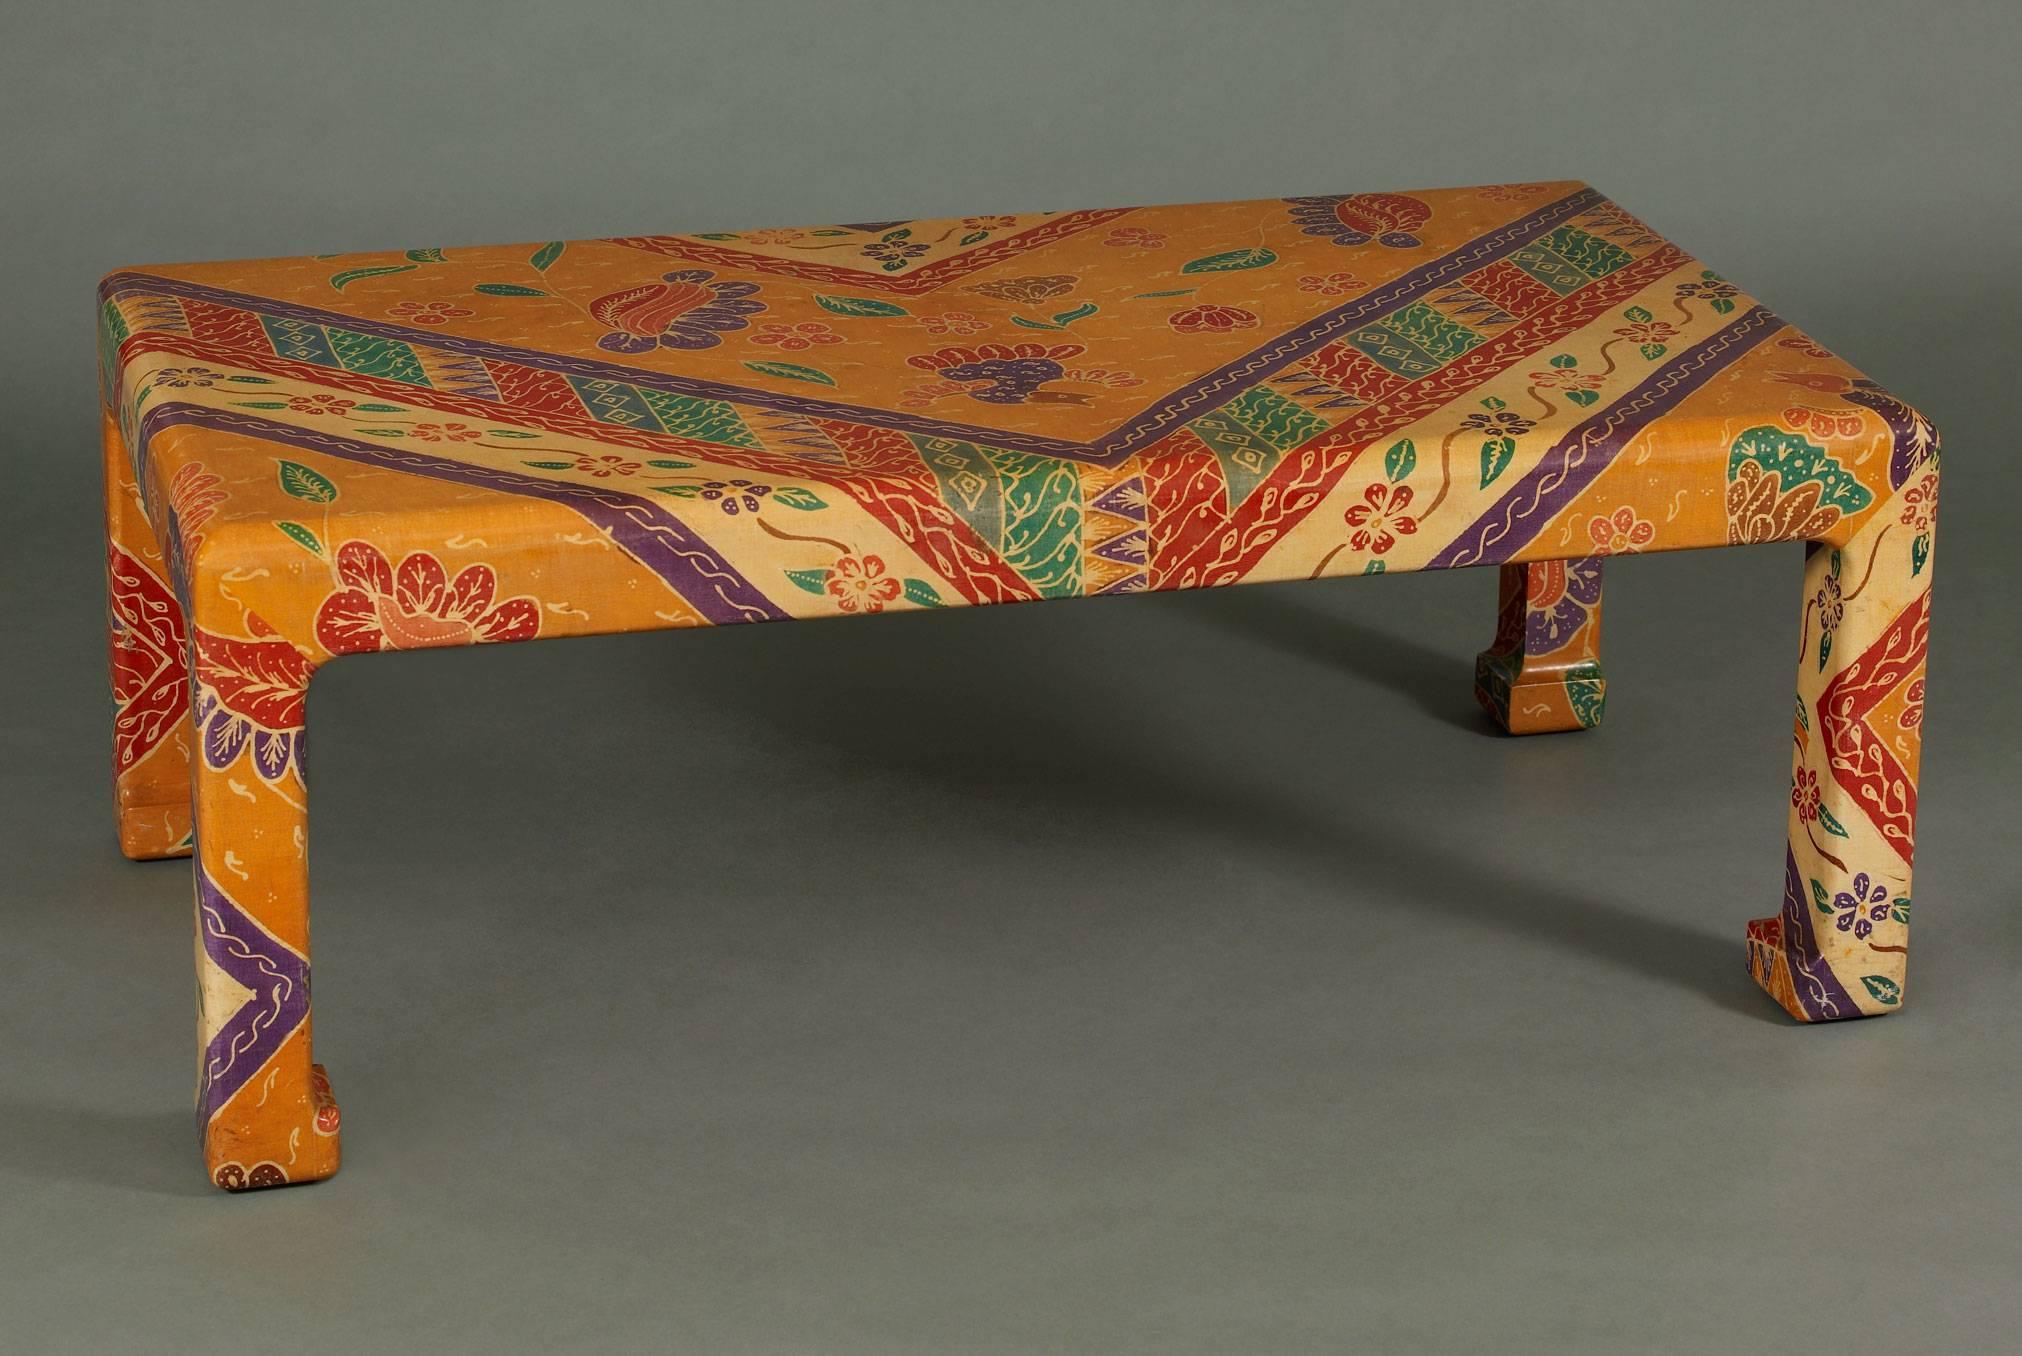 Chinoiserie low table with Asian-inspired feet wrapped in multi-color Matisse-like batik fabric. Signed with original leather label underneath top.